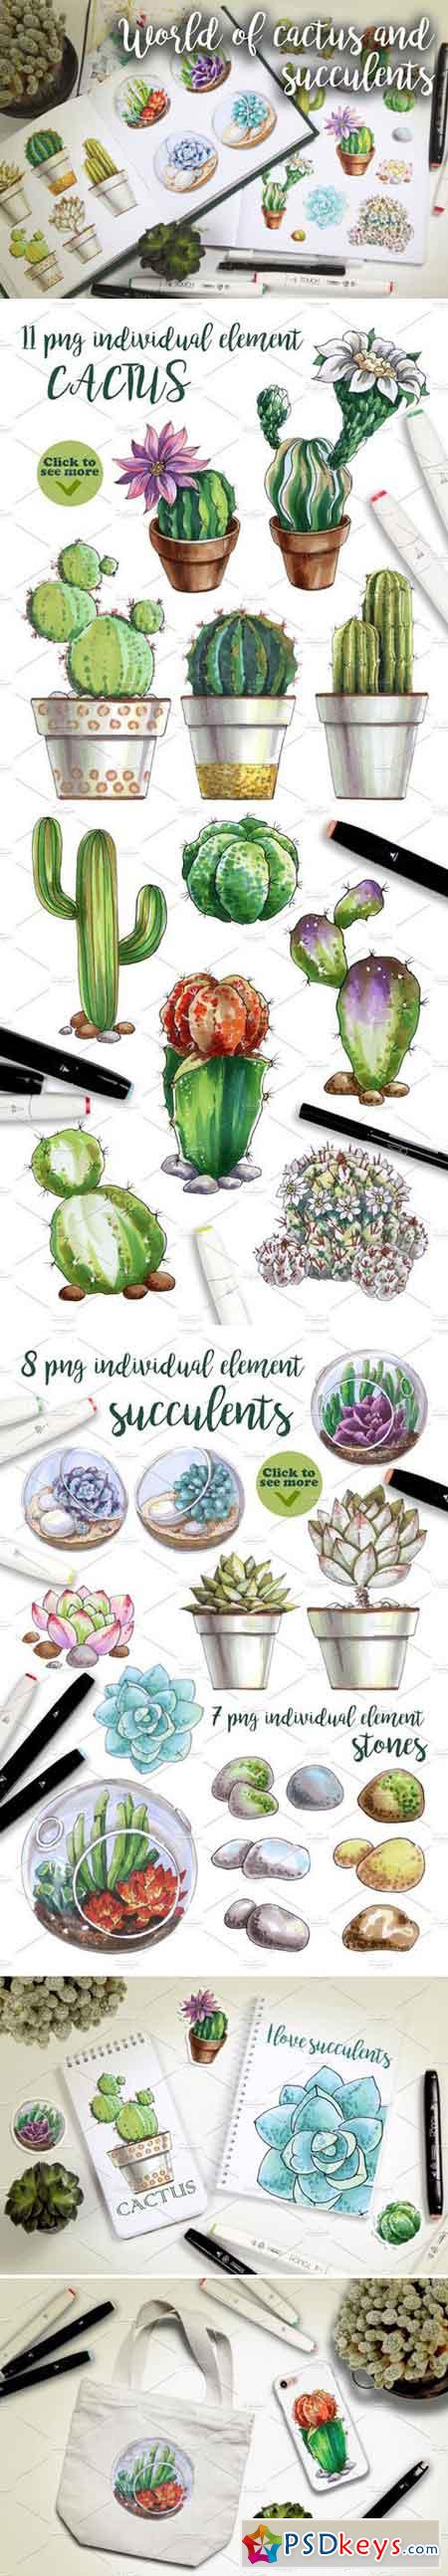 World of cactus and succulents 2231329